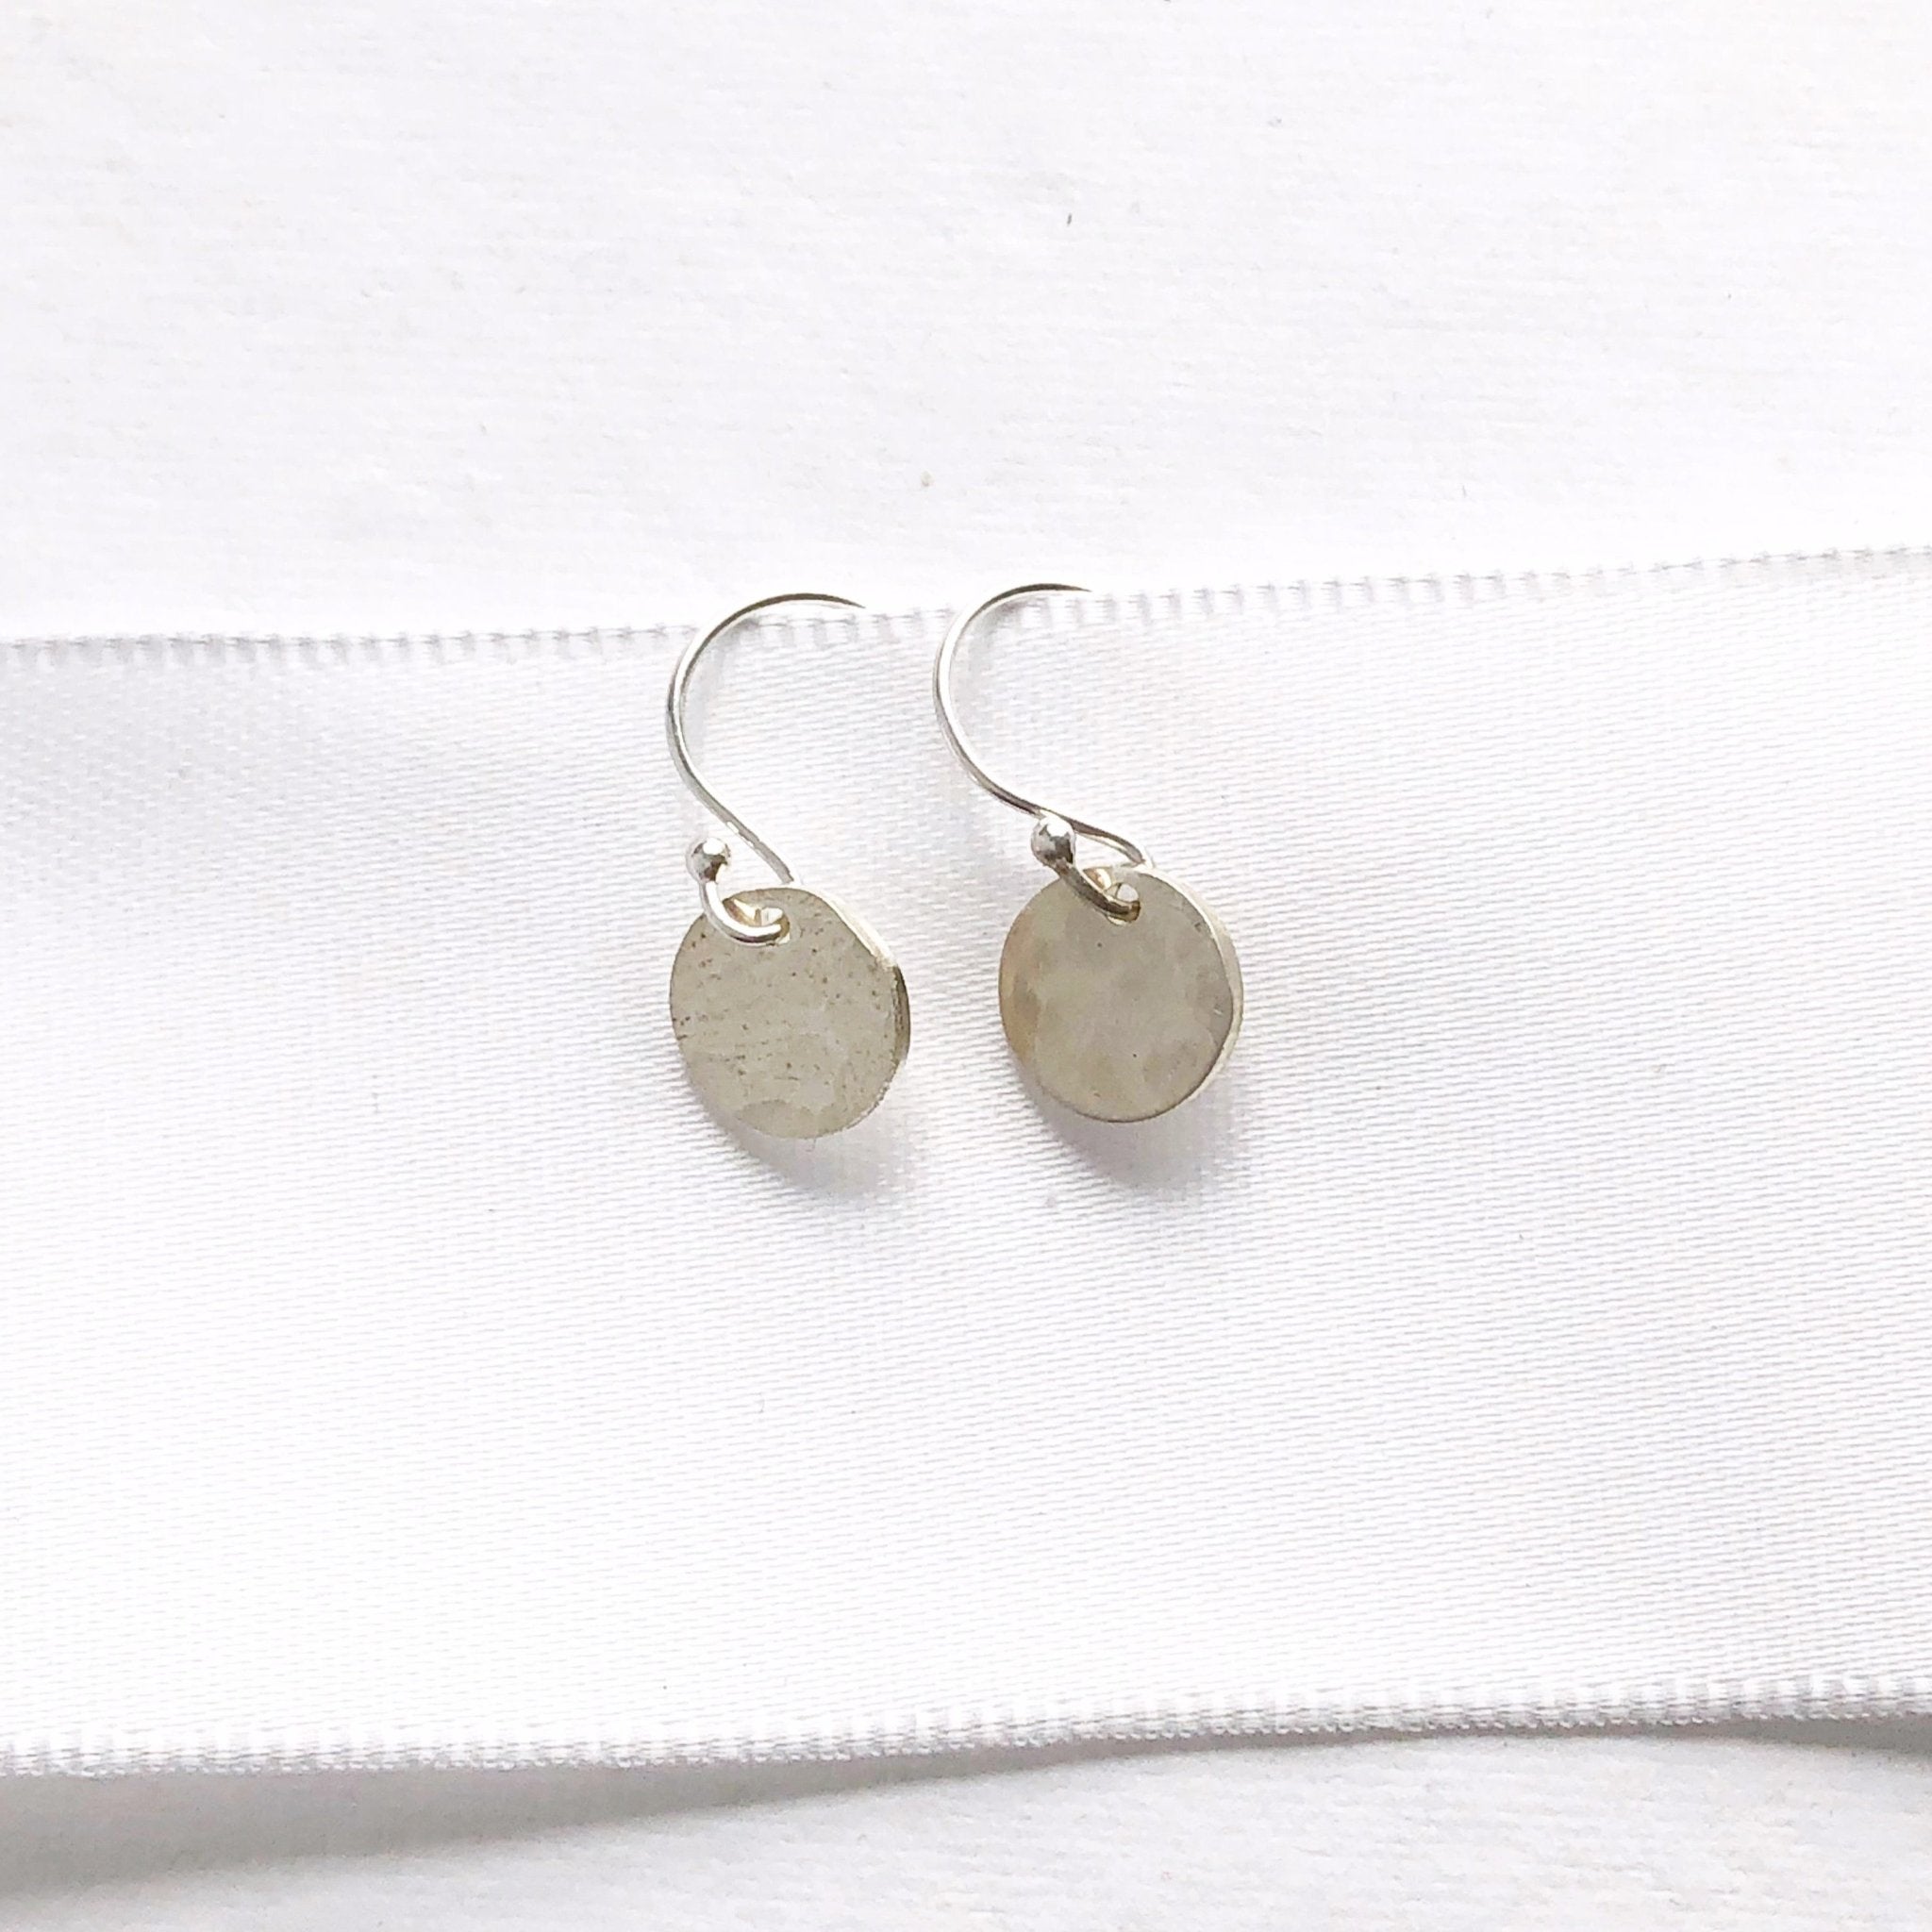 Silver Monica Earrings by Sarah Cornwell Jewelry. Shimmery, dainty silver 3/8 inch textured disc earrings on a white background.